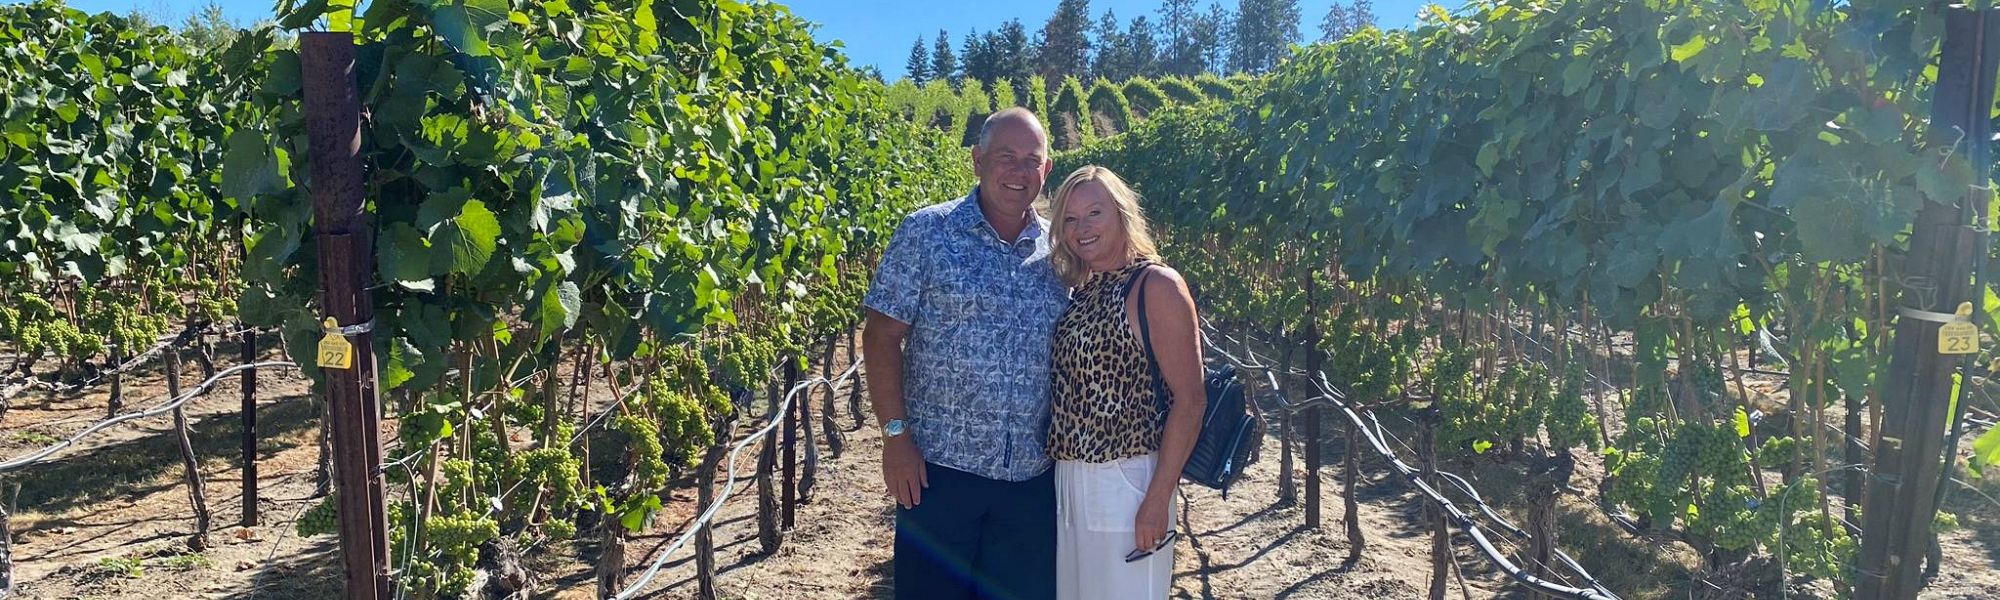 Classy couple enjoying their private wine tour for their anniversary while posing in the vines at Ex Nihilo Vineyards.